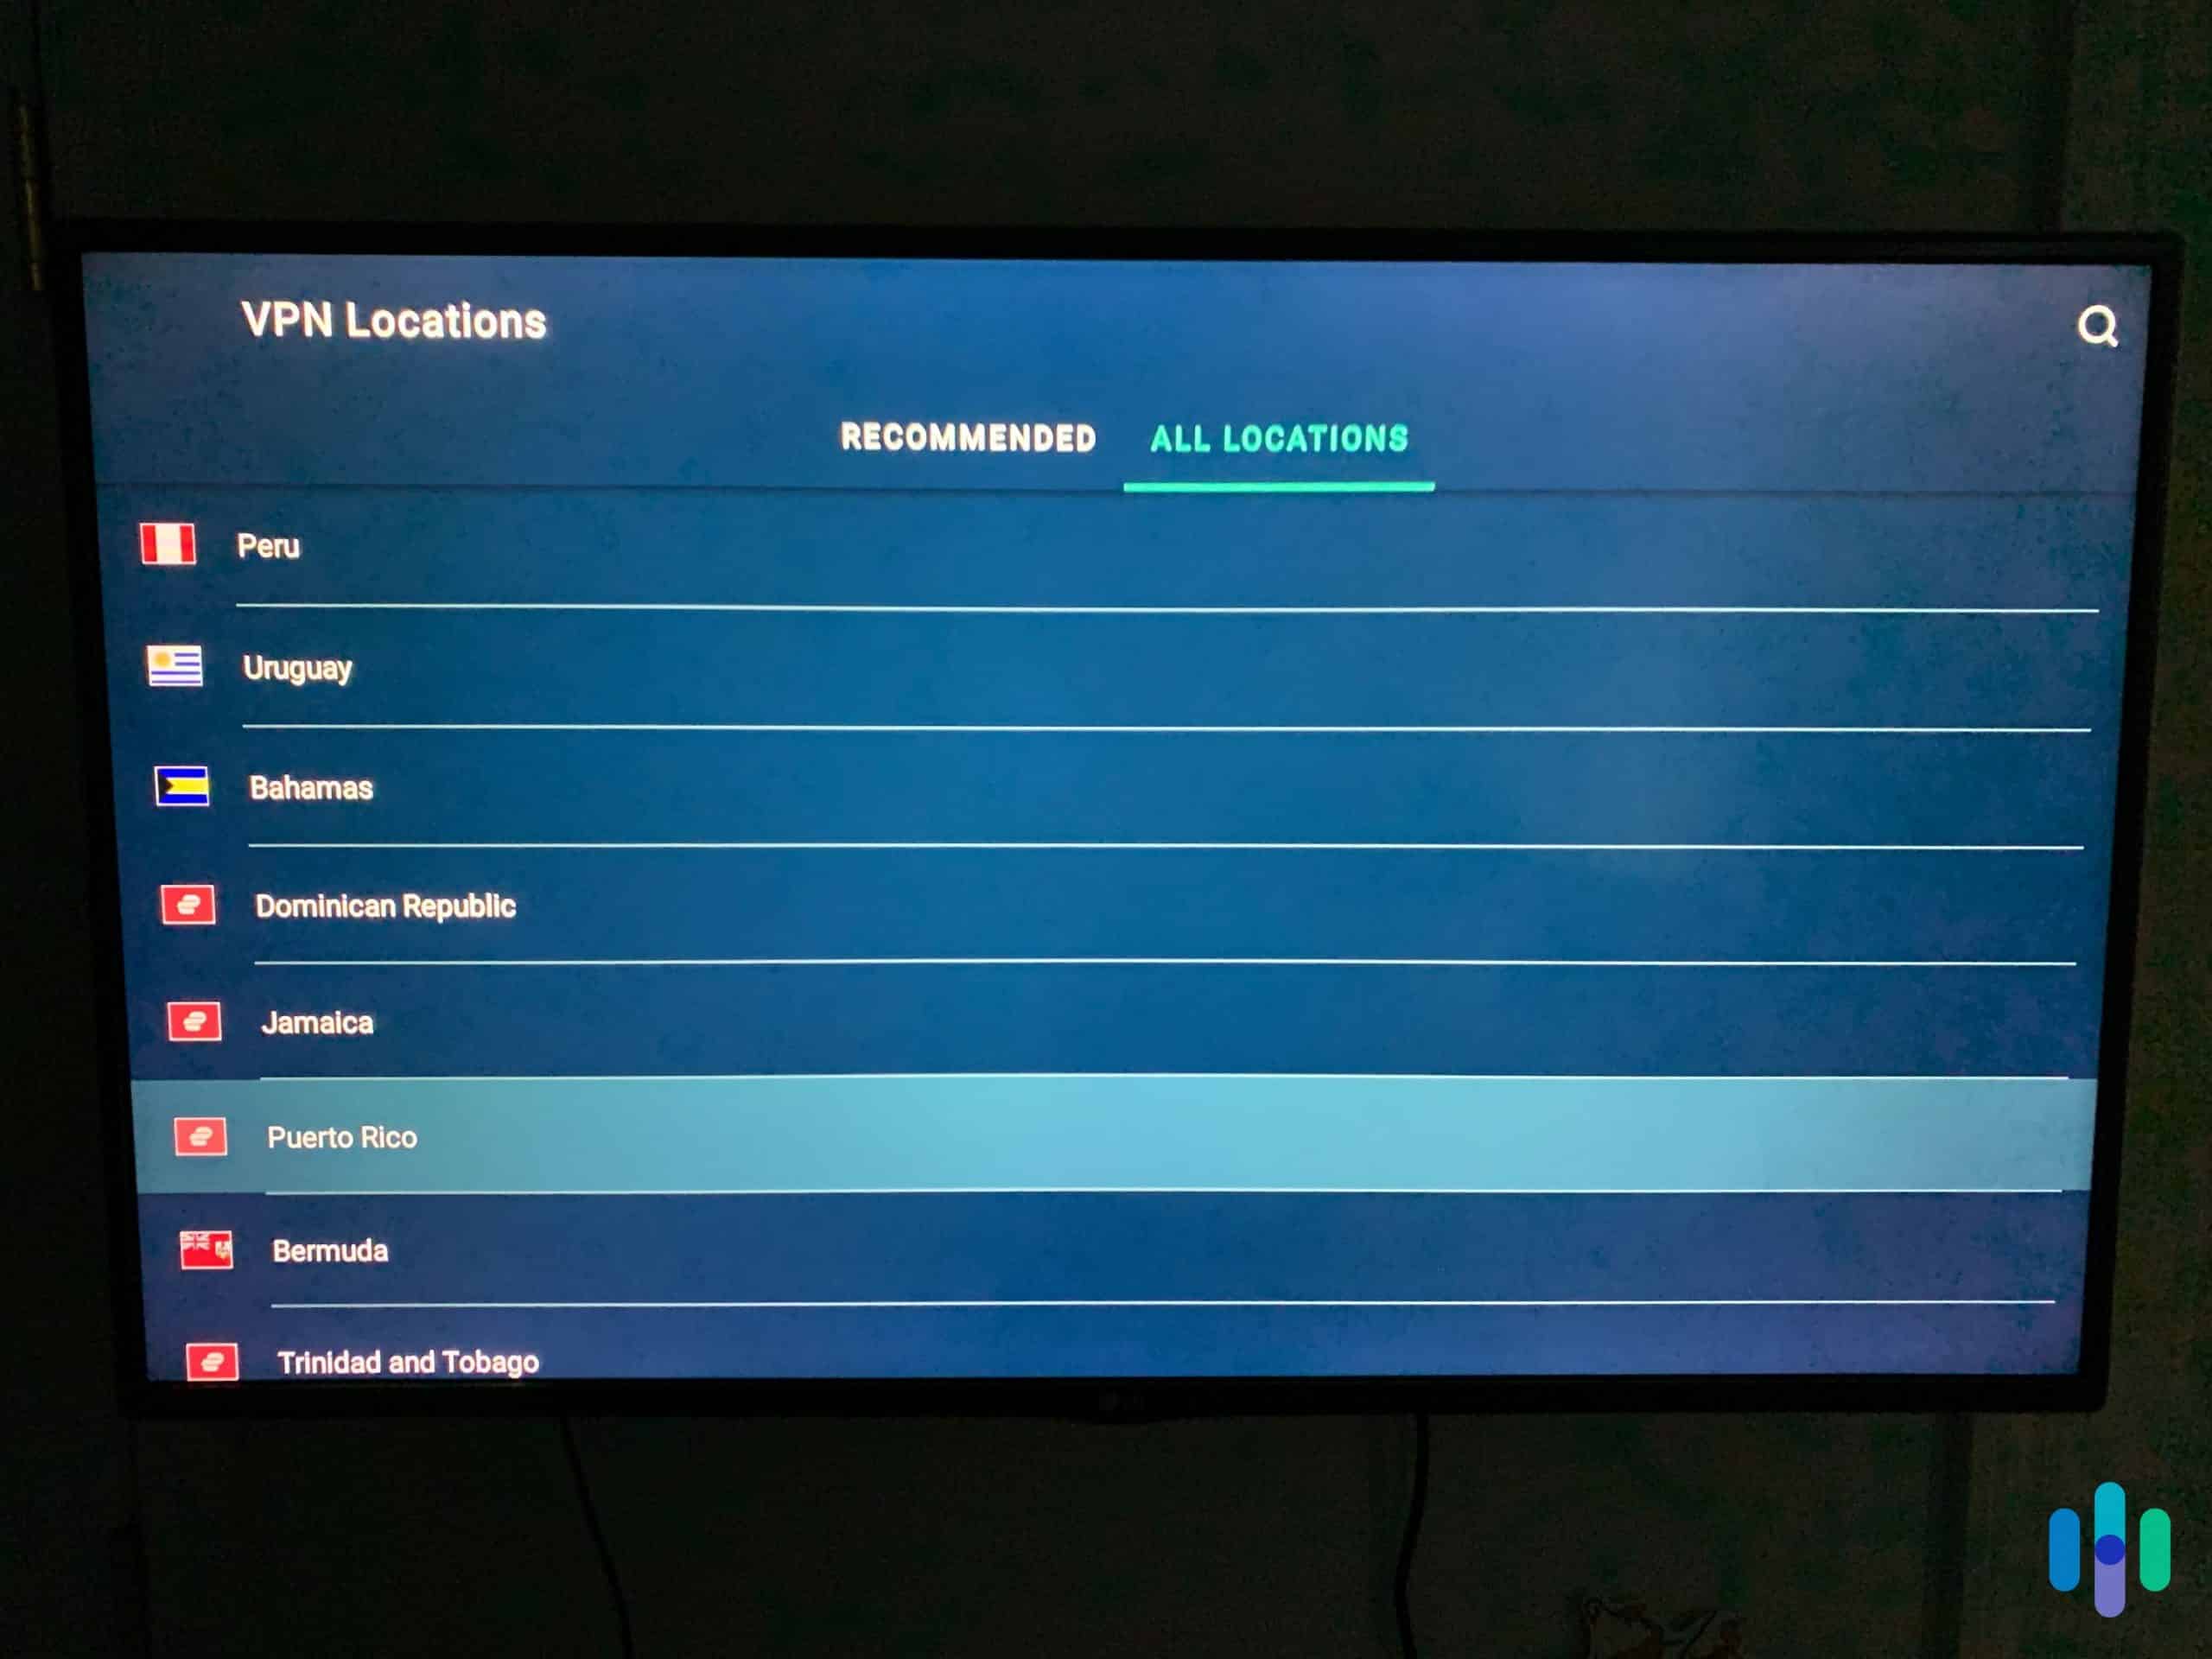 Amazon Fire TV Stick using ExpressVPN and looking at the VPN Server Locations